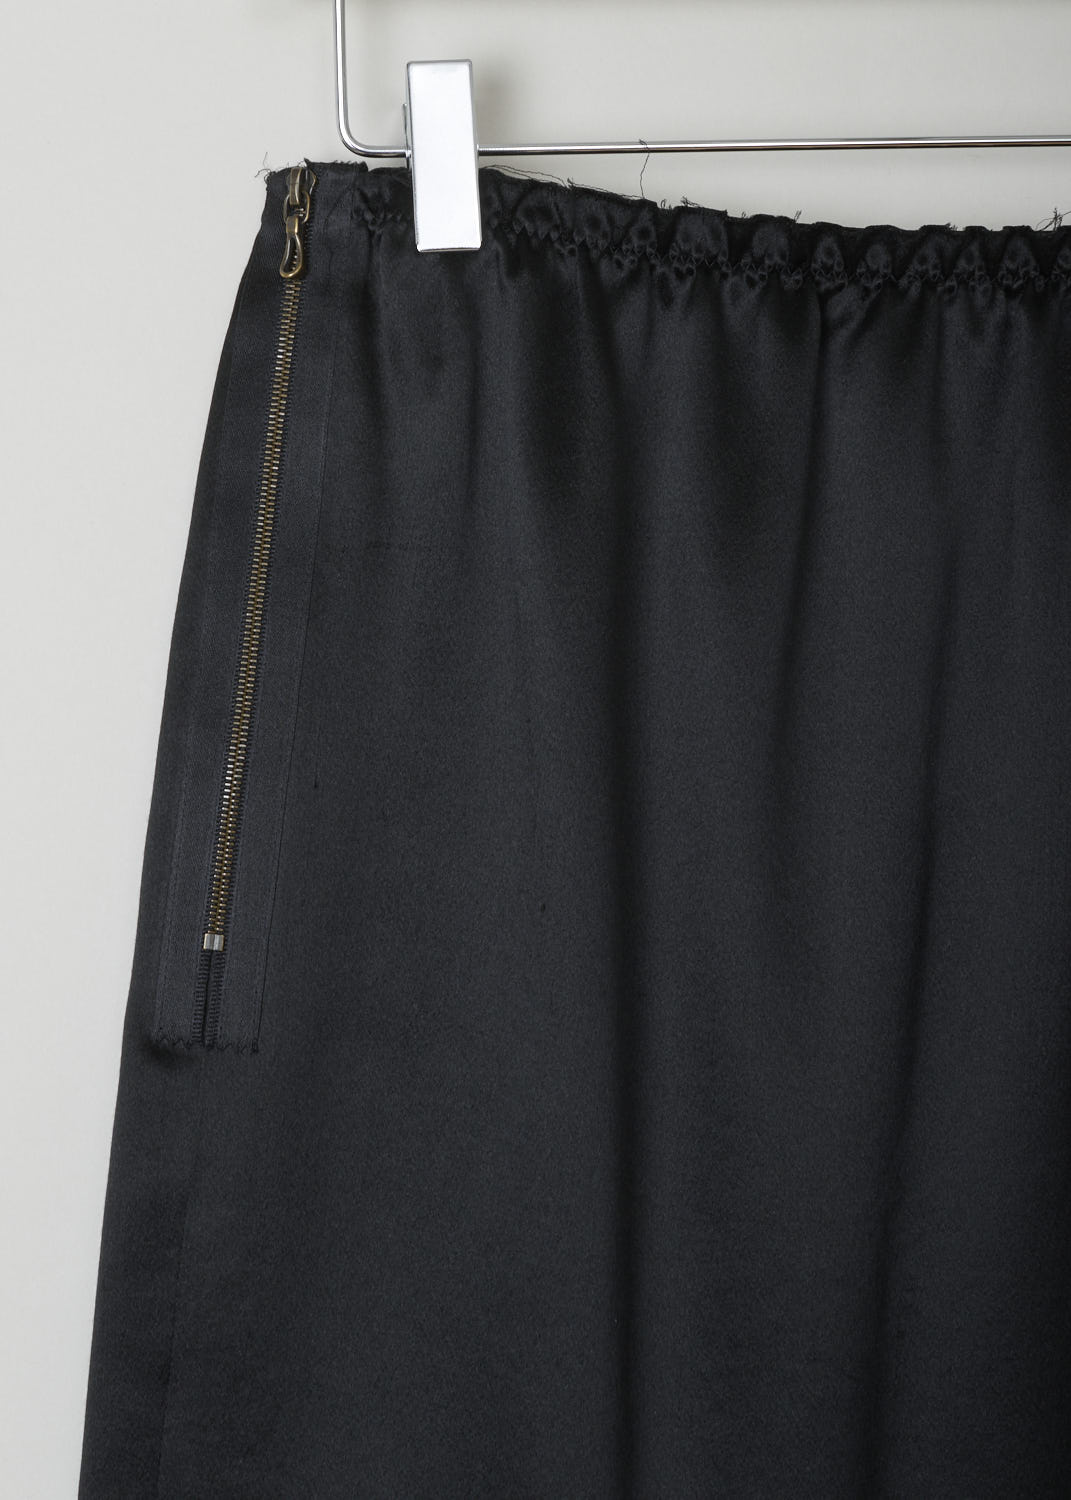 LANVIN, BLACK SILK MINI SKIRT, W040110626P3A, Black, Detail, This silky smooth black mini skirt features an elasticated waistband with gathered silk ruffles, a bronze-toned side zipper and a broad hemline. 
